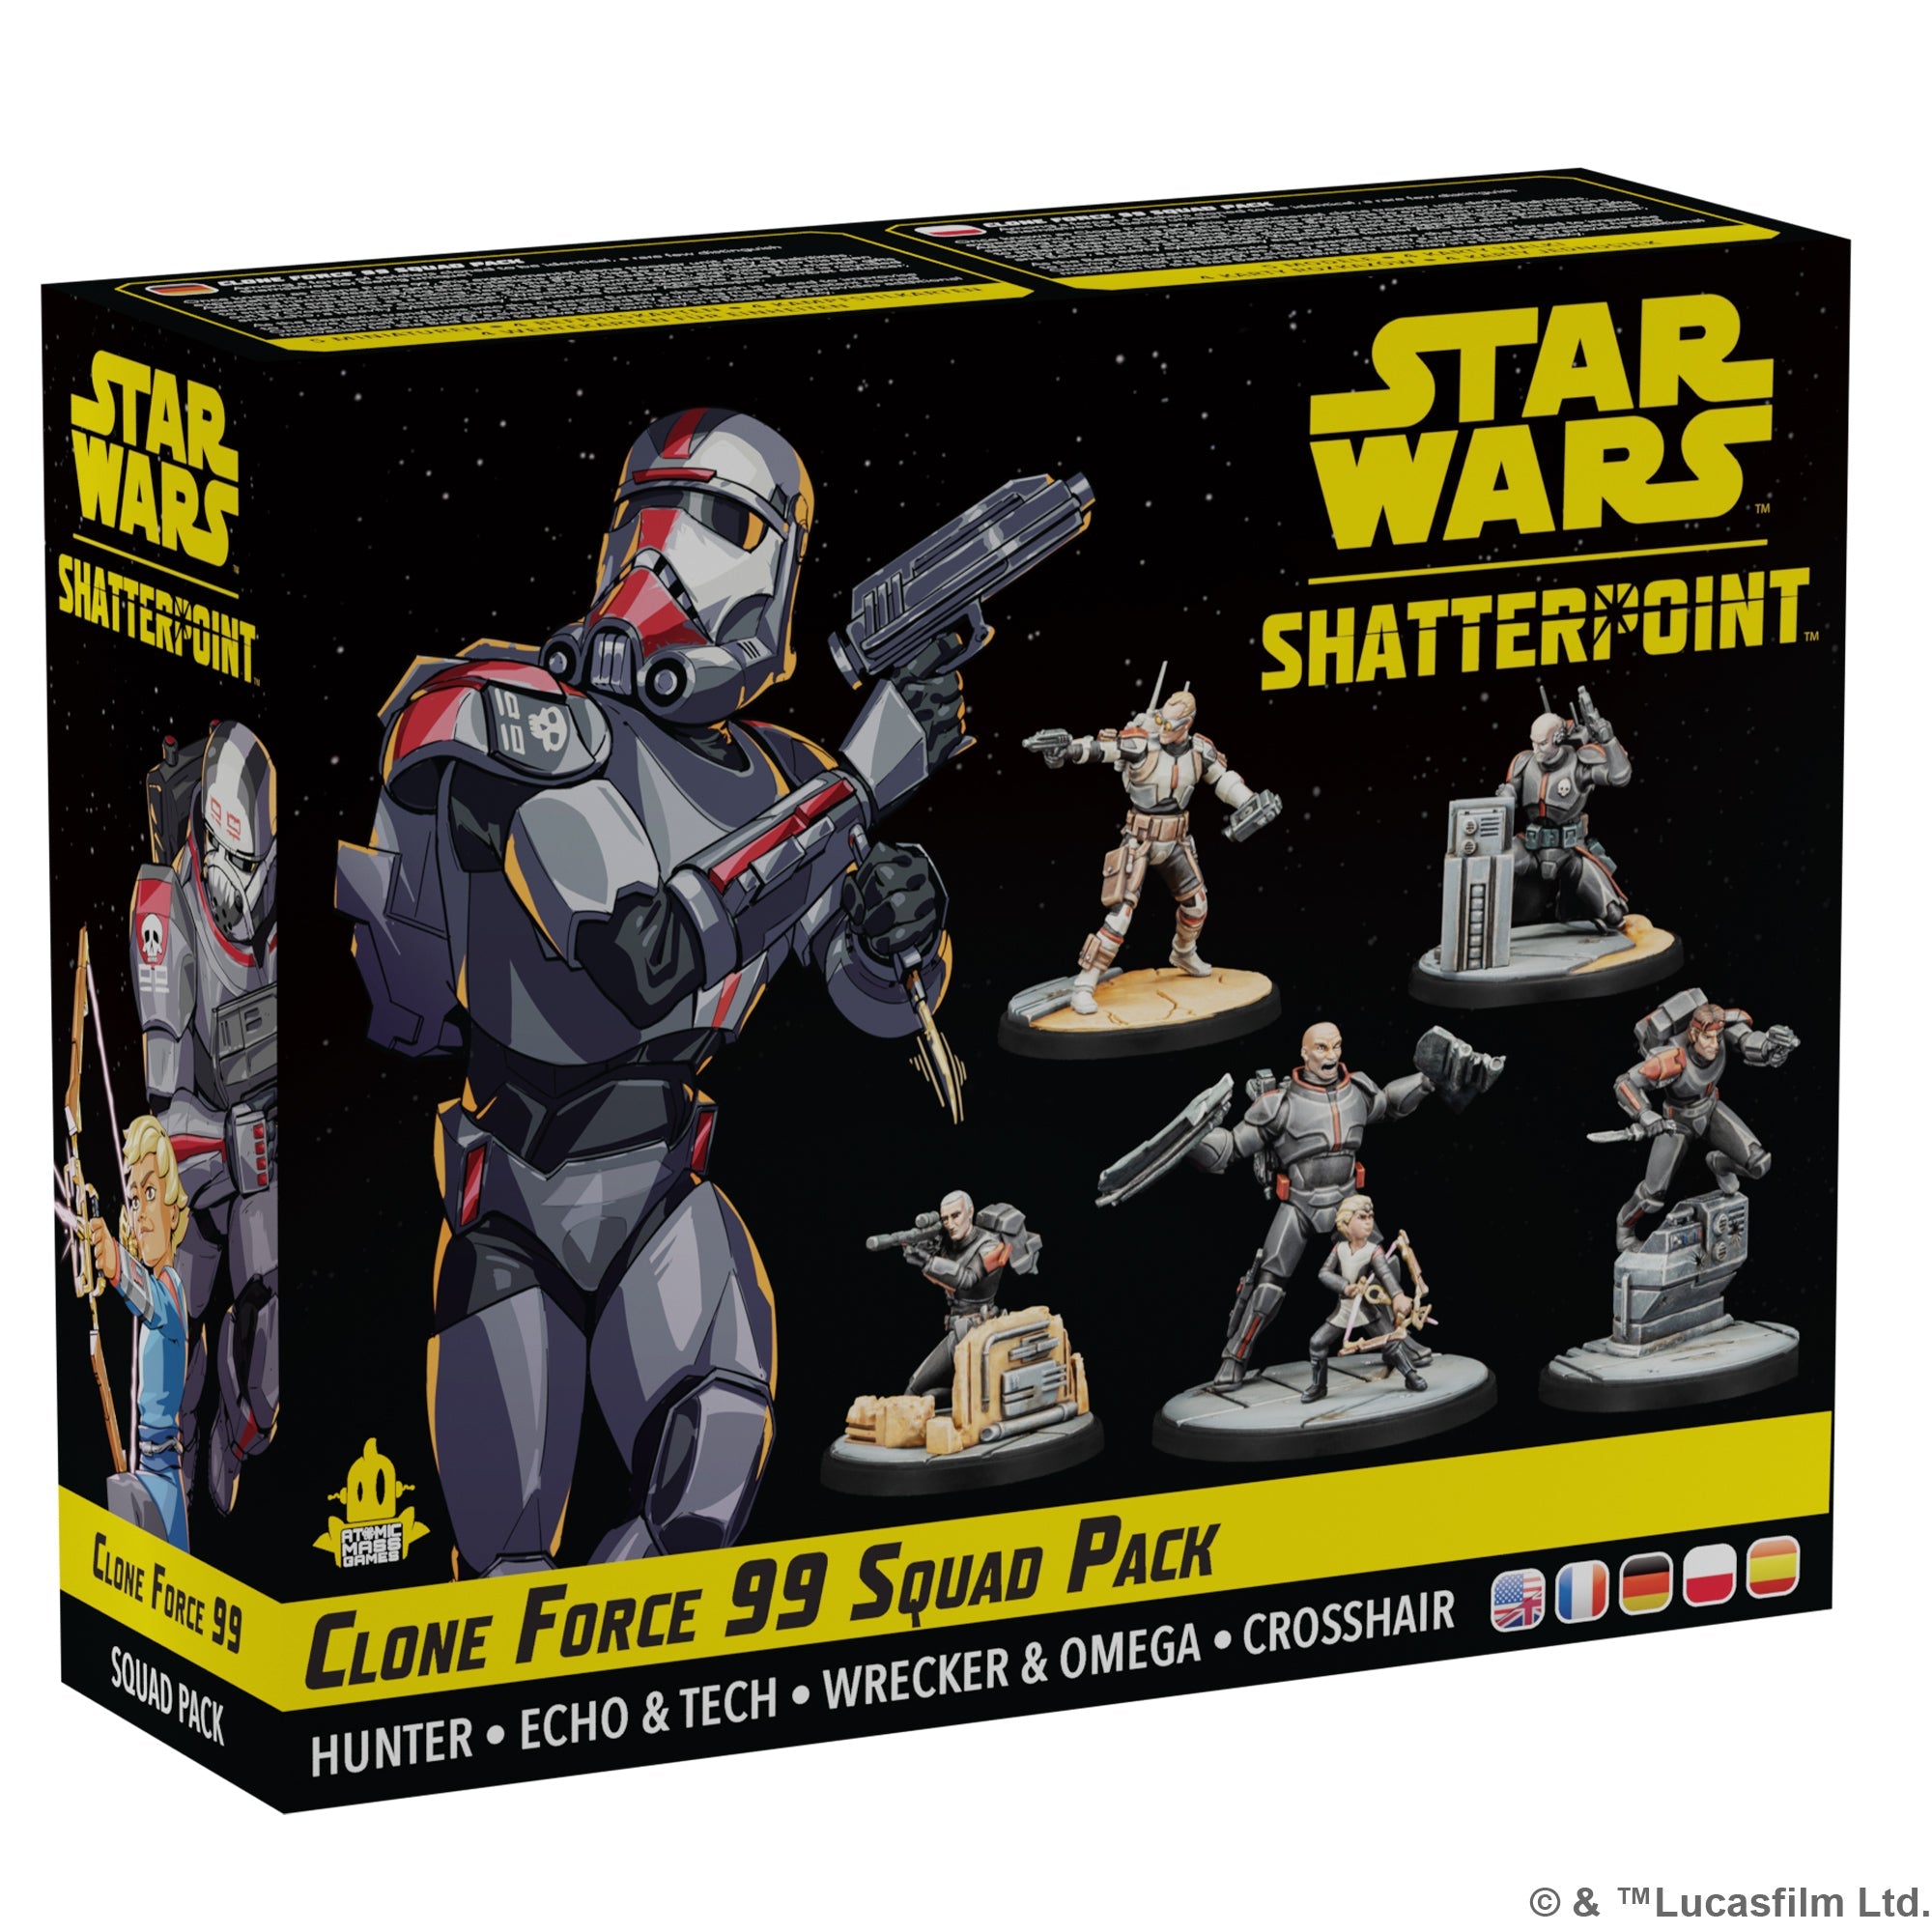 Star Wars Shatterpoint: Clone Force 99, The Bad Batch Squad Pack